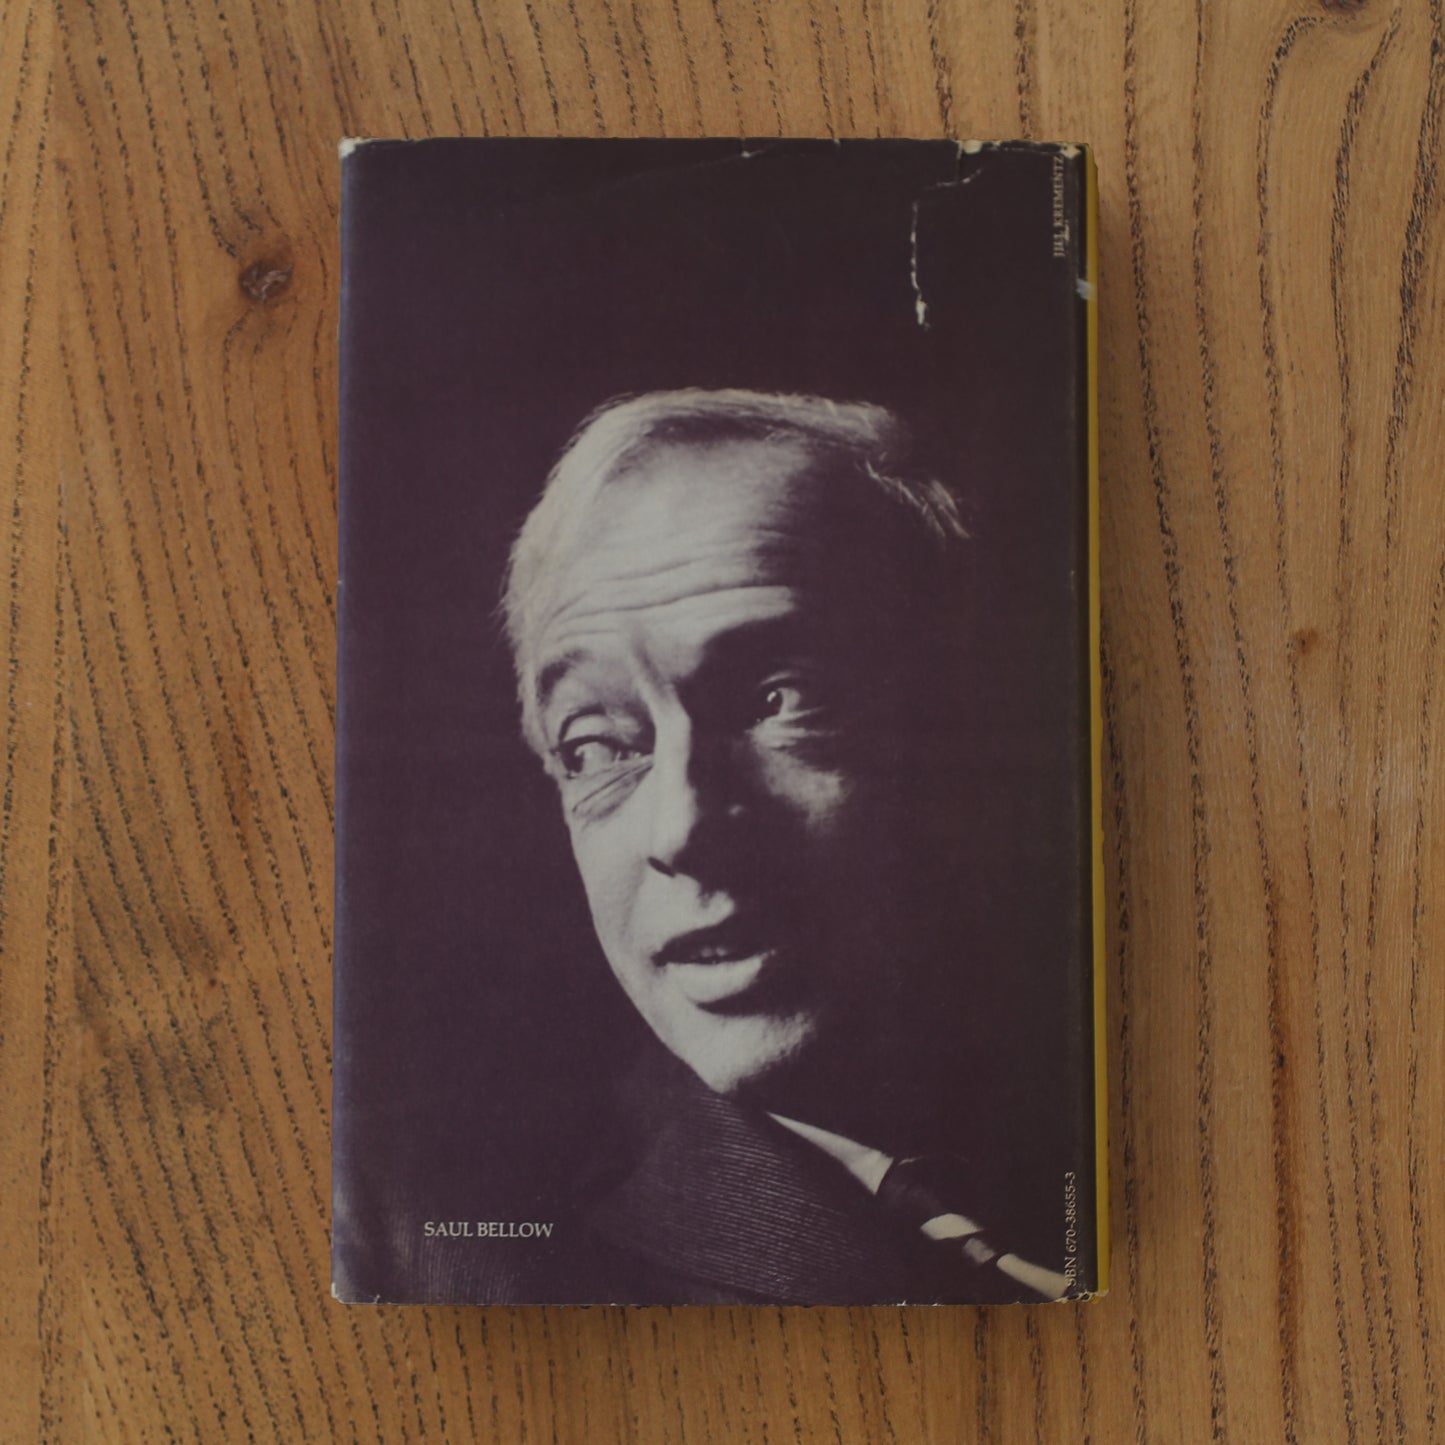 Saul Bellow - Humboldt's Gift (First edition)